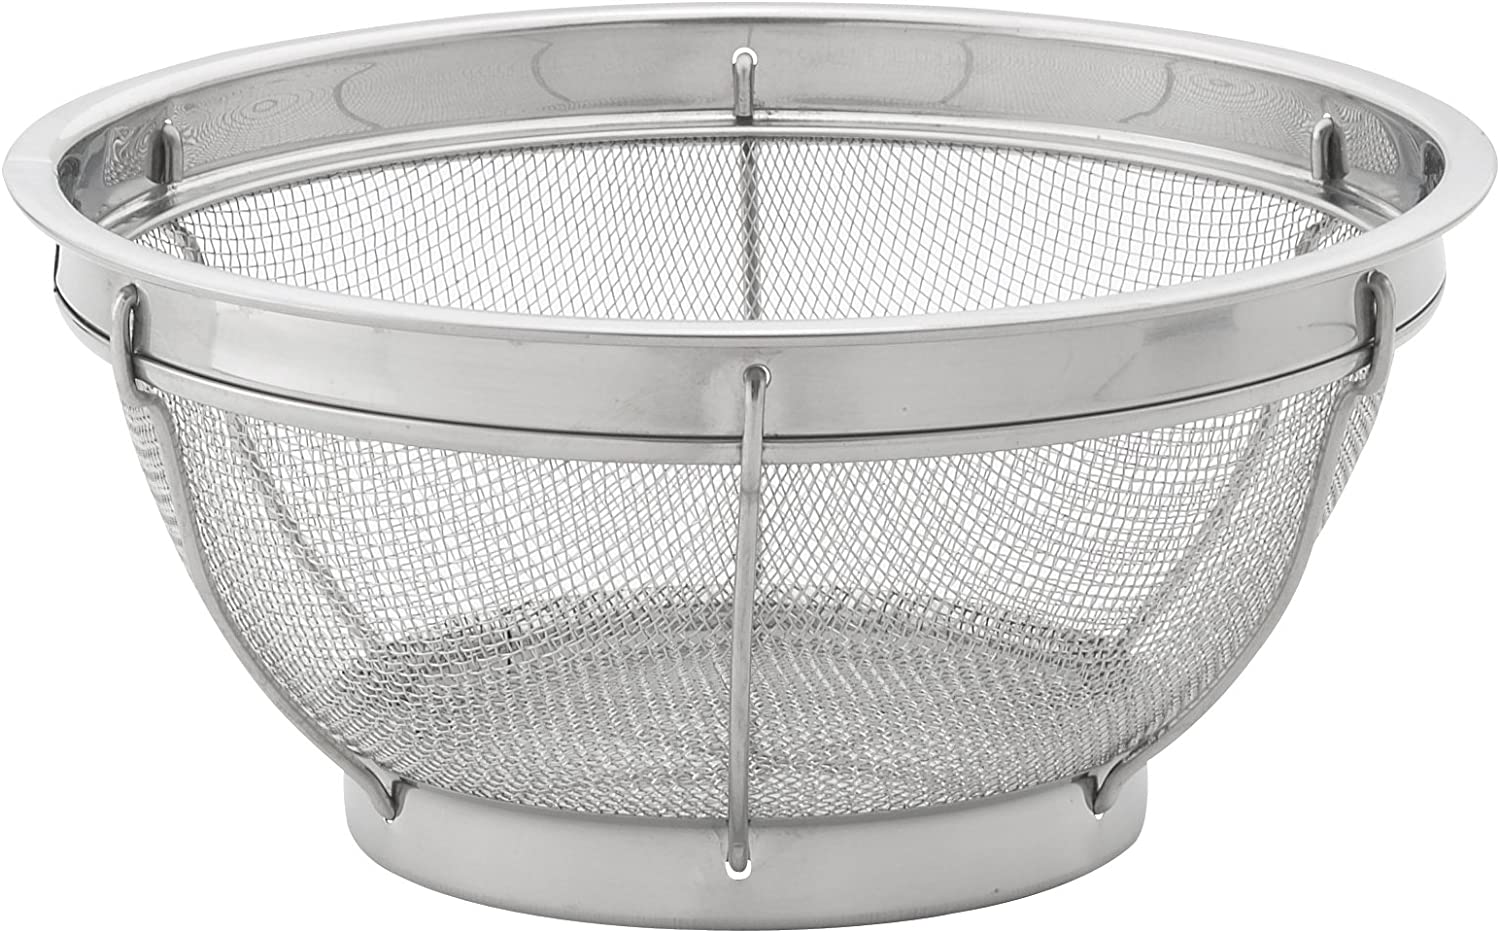 HIC Harold Import Co. Reinforced Mesh Colander, 9-Inch, 18/8 Stainless Steel